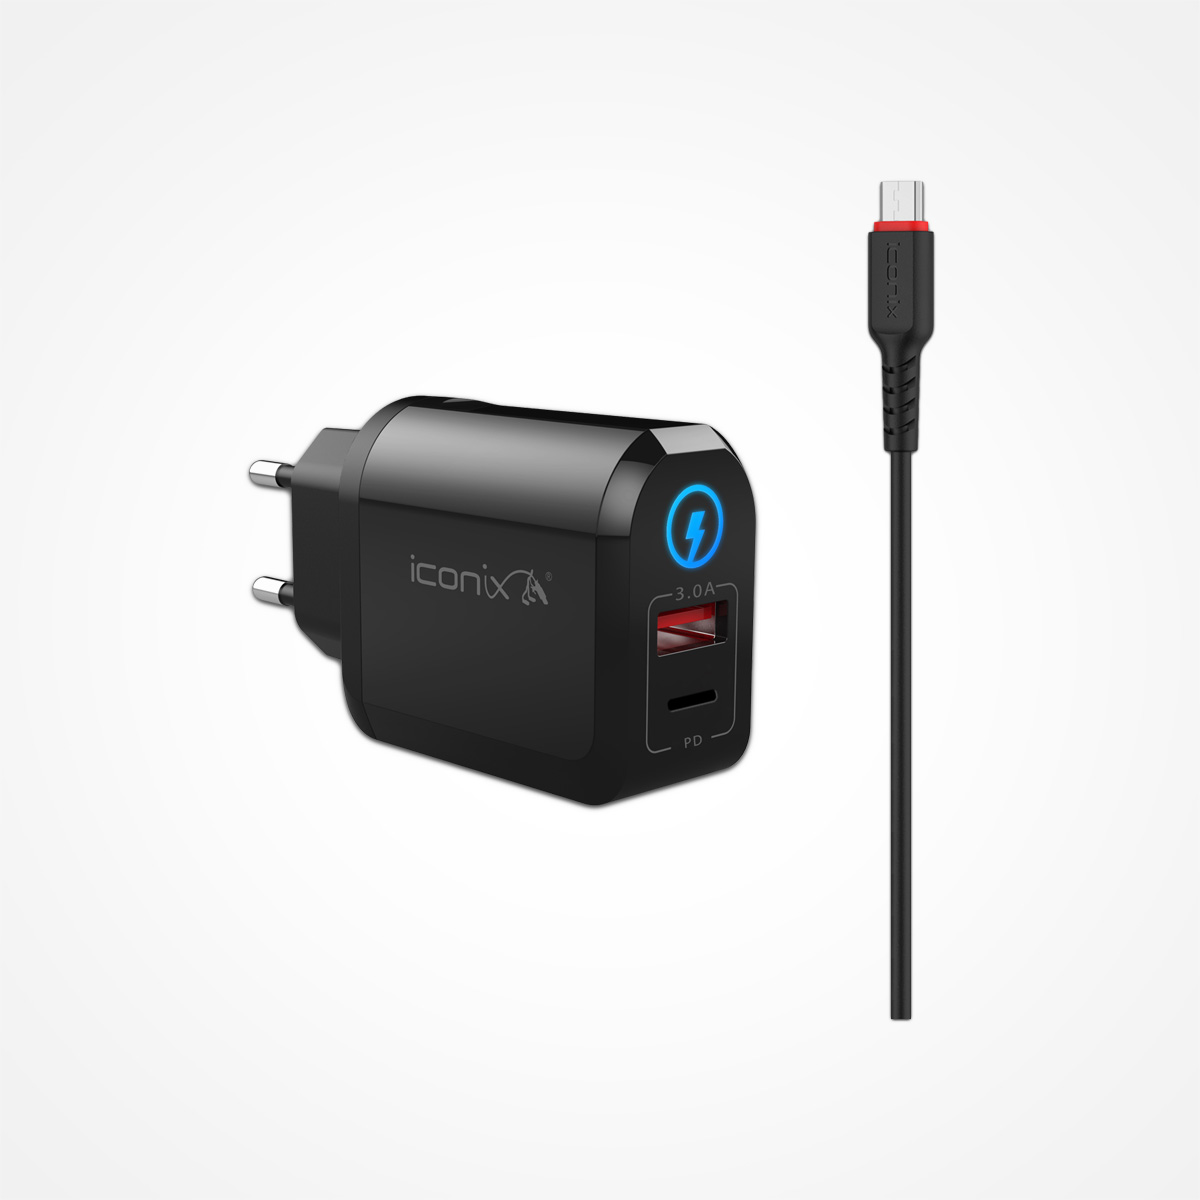 CHARGER 2 PORT QUICK CHARGE TYPE C & USB FOR ANDROID I CONIX 4.8A IC-HC1028 راسيه شاحن سريع مخرج عادي ومخرج تايب سي مع كبل مايكرو ,Smartphones & Tab Chargers